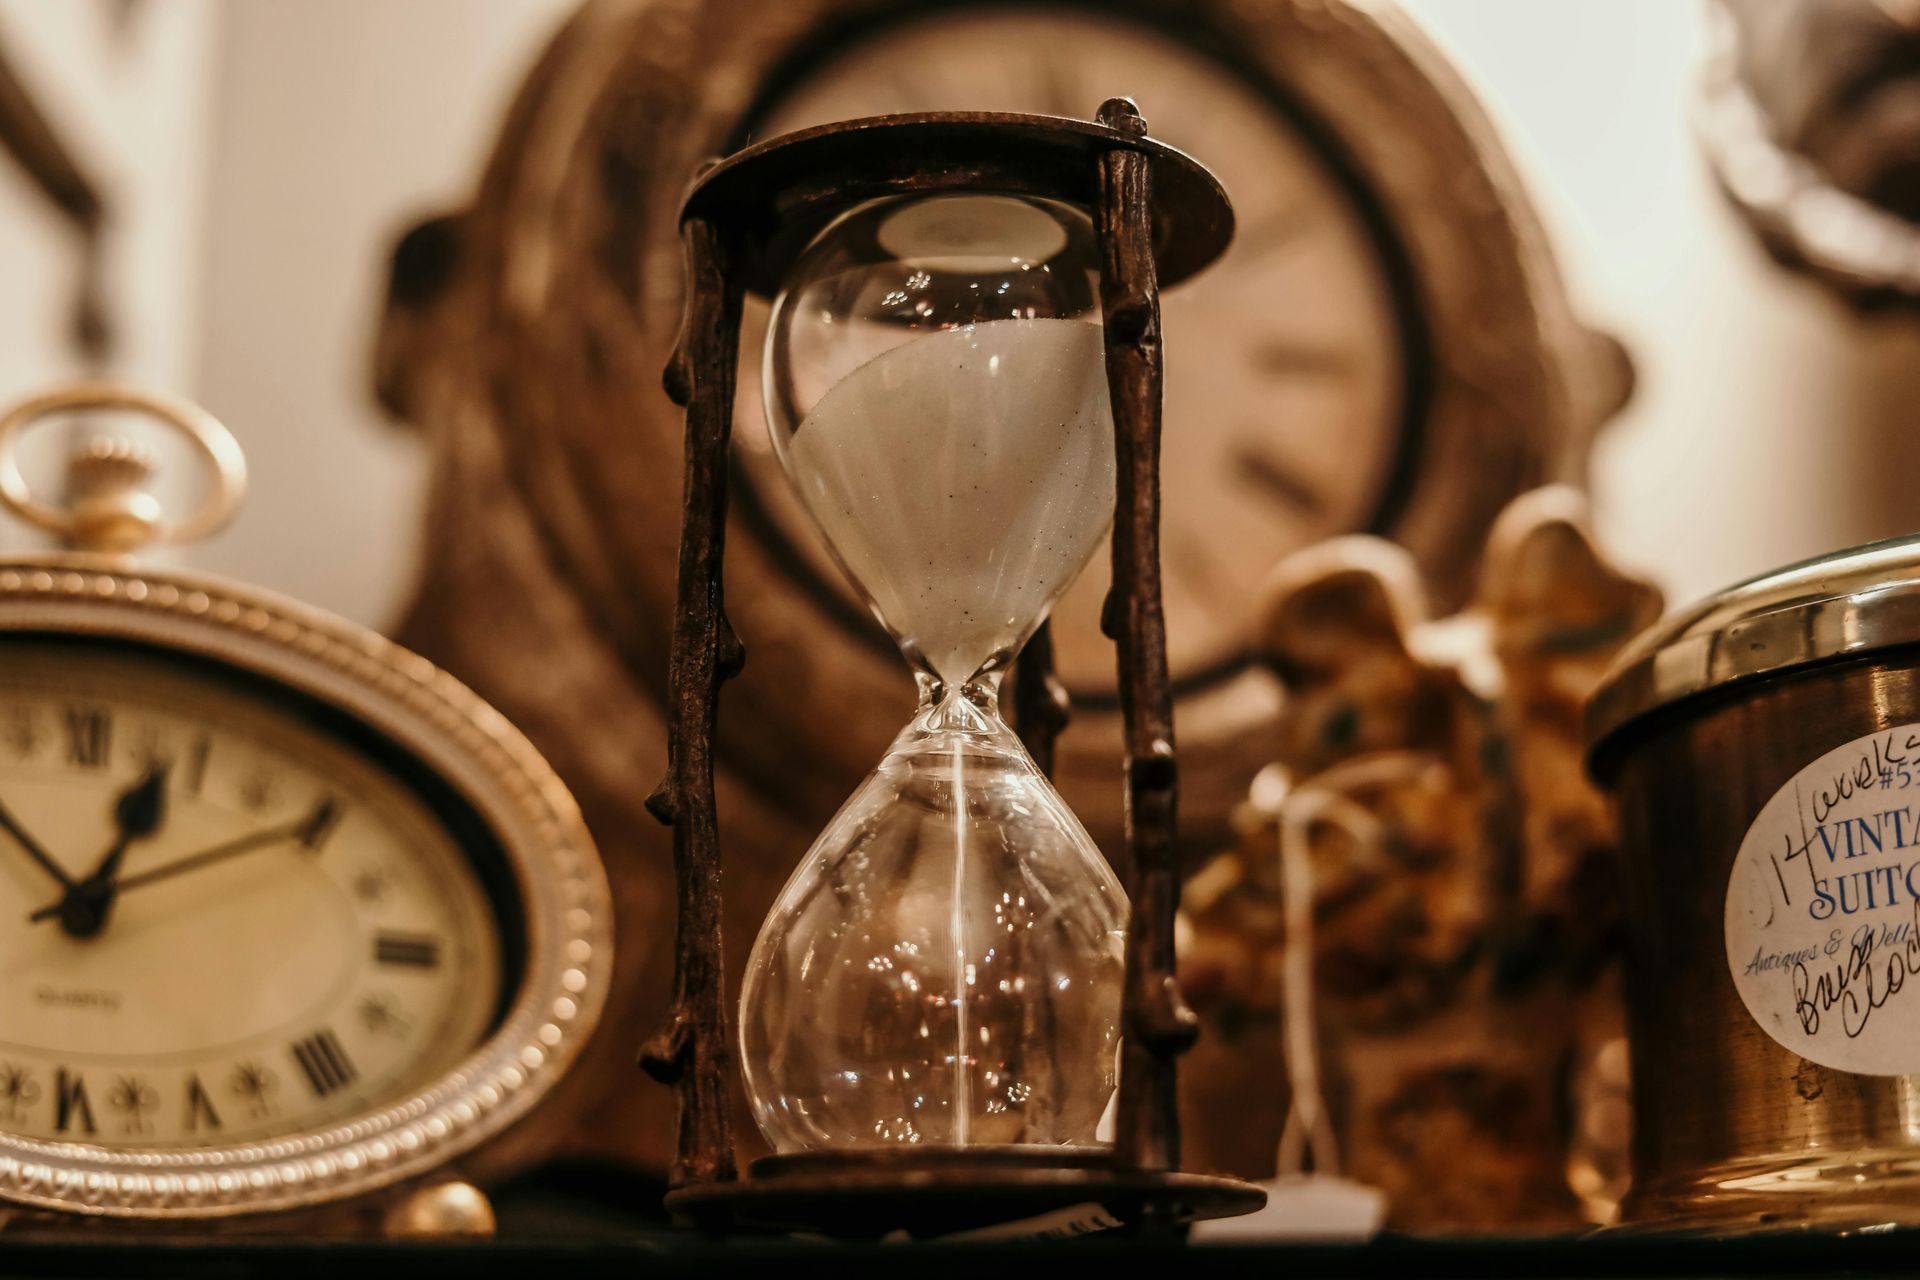 A hourglass is sitting on a shelf next to a clock.